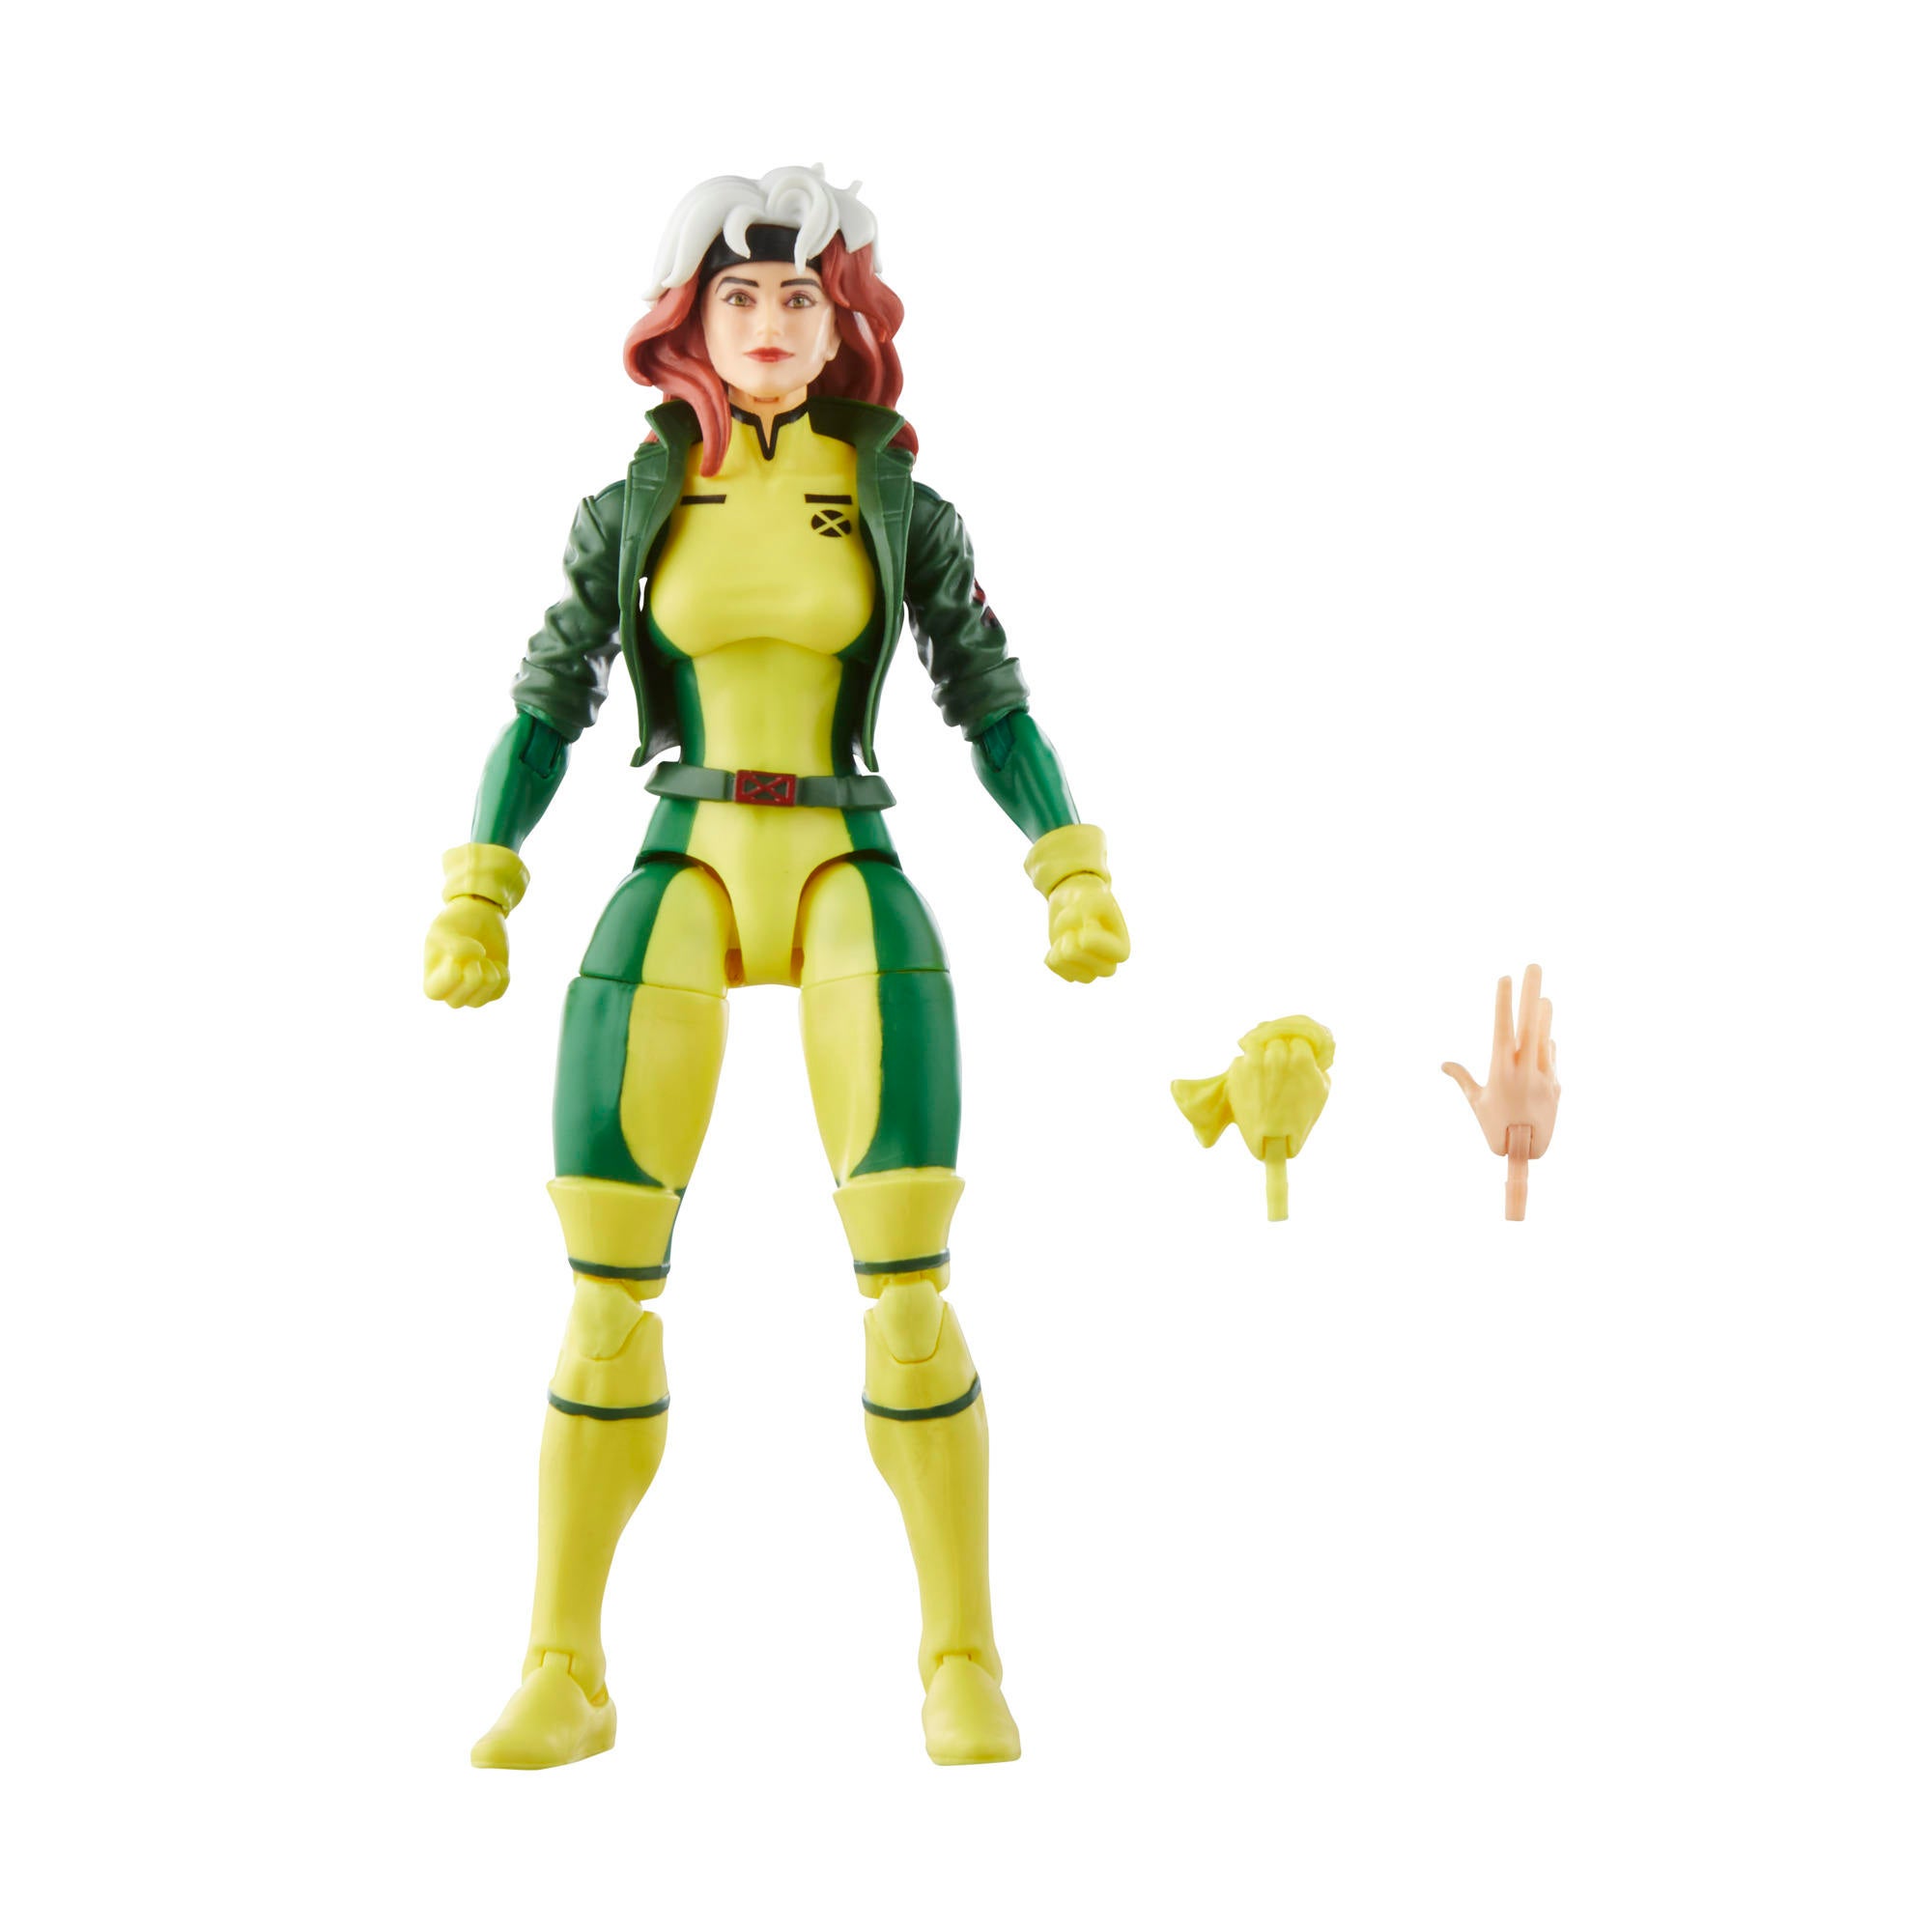 Marvel Legends X-Men '97 Wave 2 may have just spoiled two huge